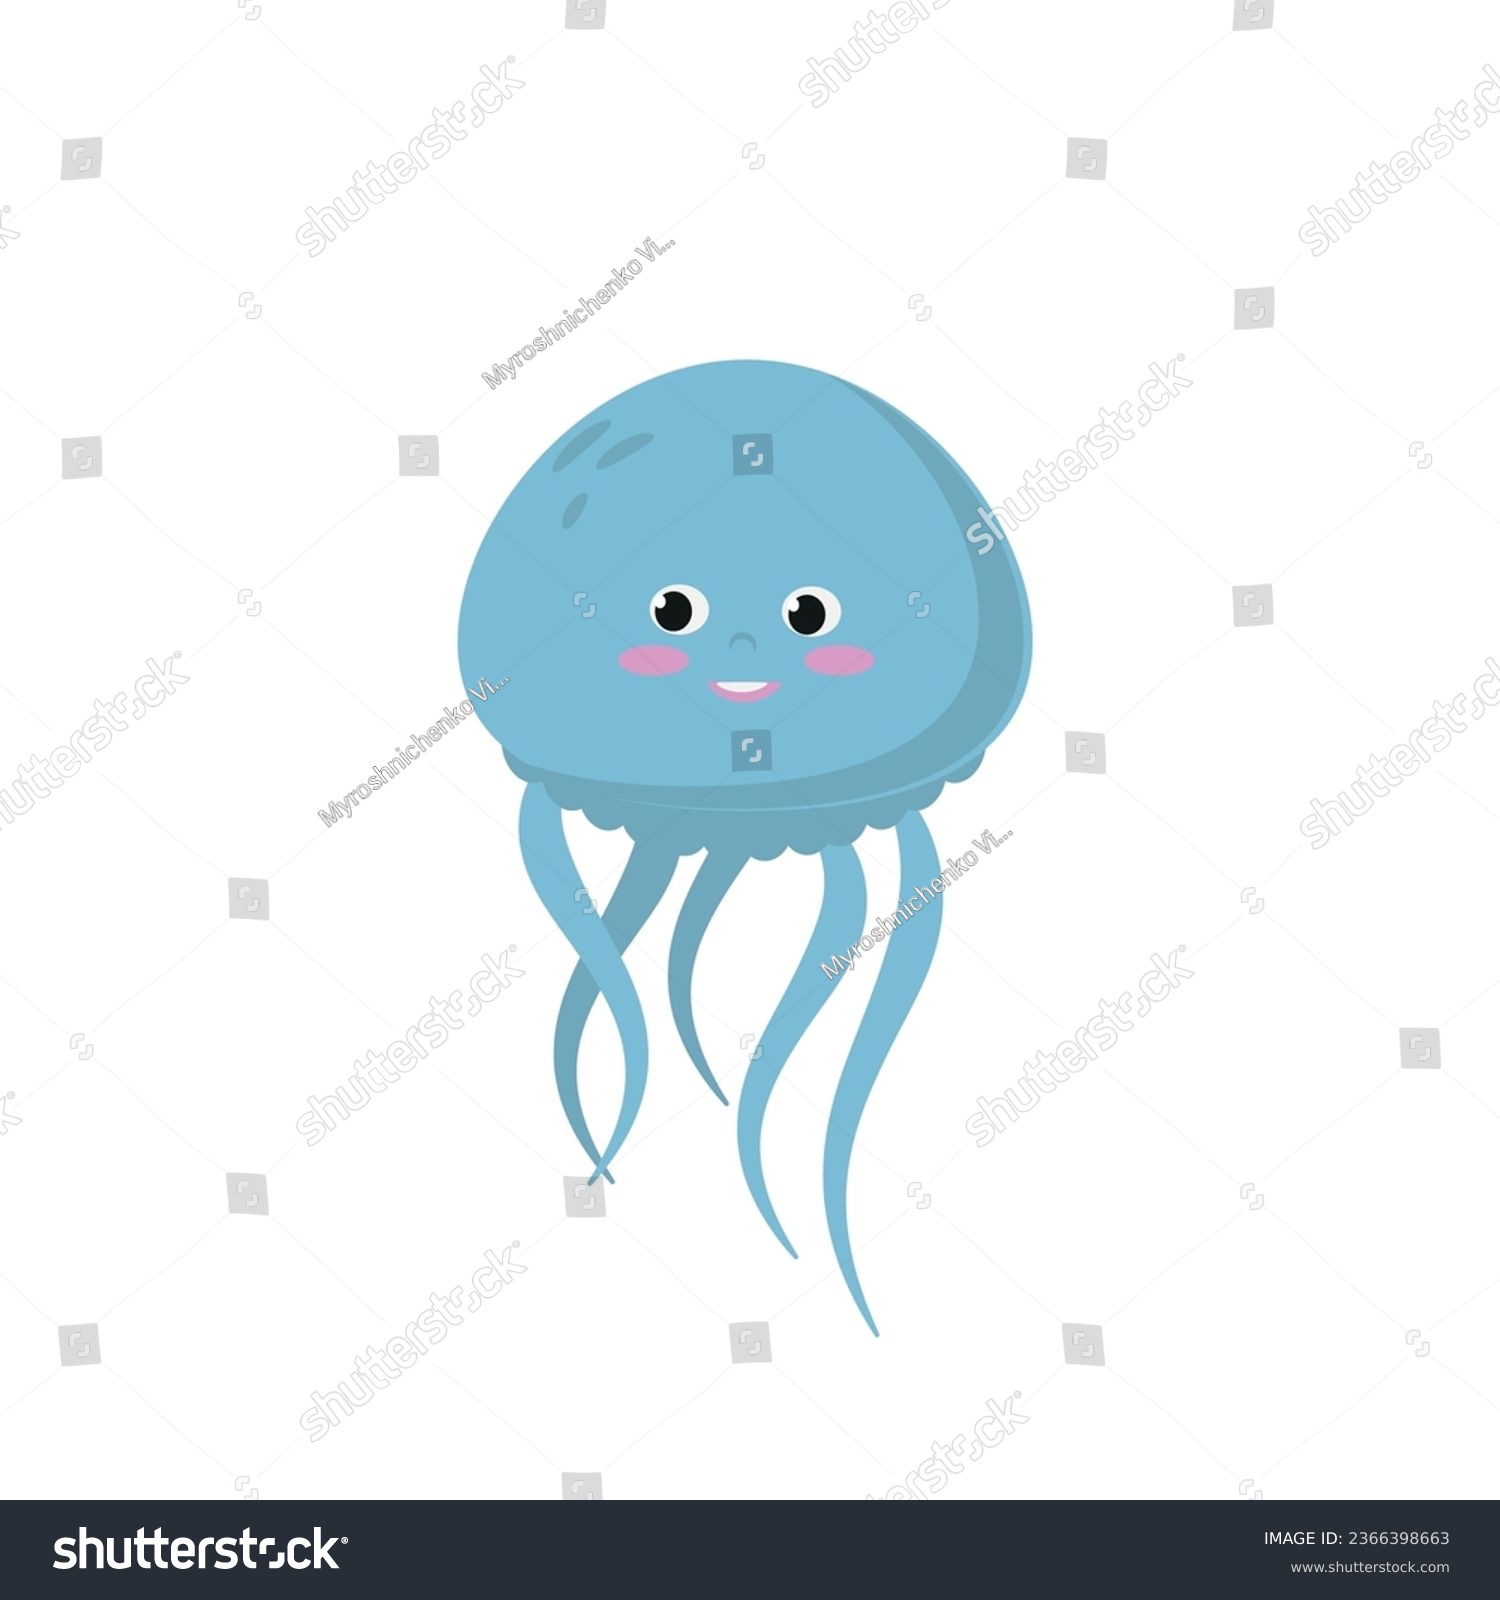 SVG of Vector jellyfish. Cute baby character.Flat illustration. Suitable for animation, using in web, apps, books, education projects. No transparency, solid colors only. Svg, lottie without bags. svg